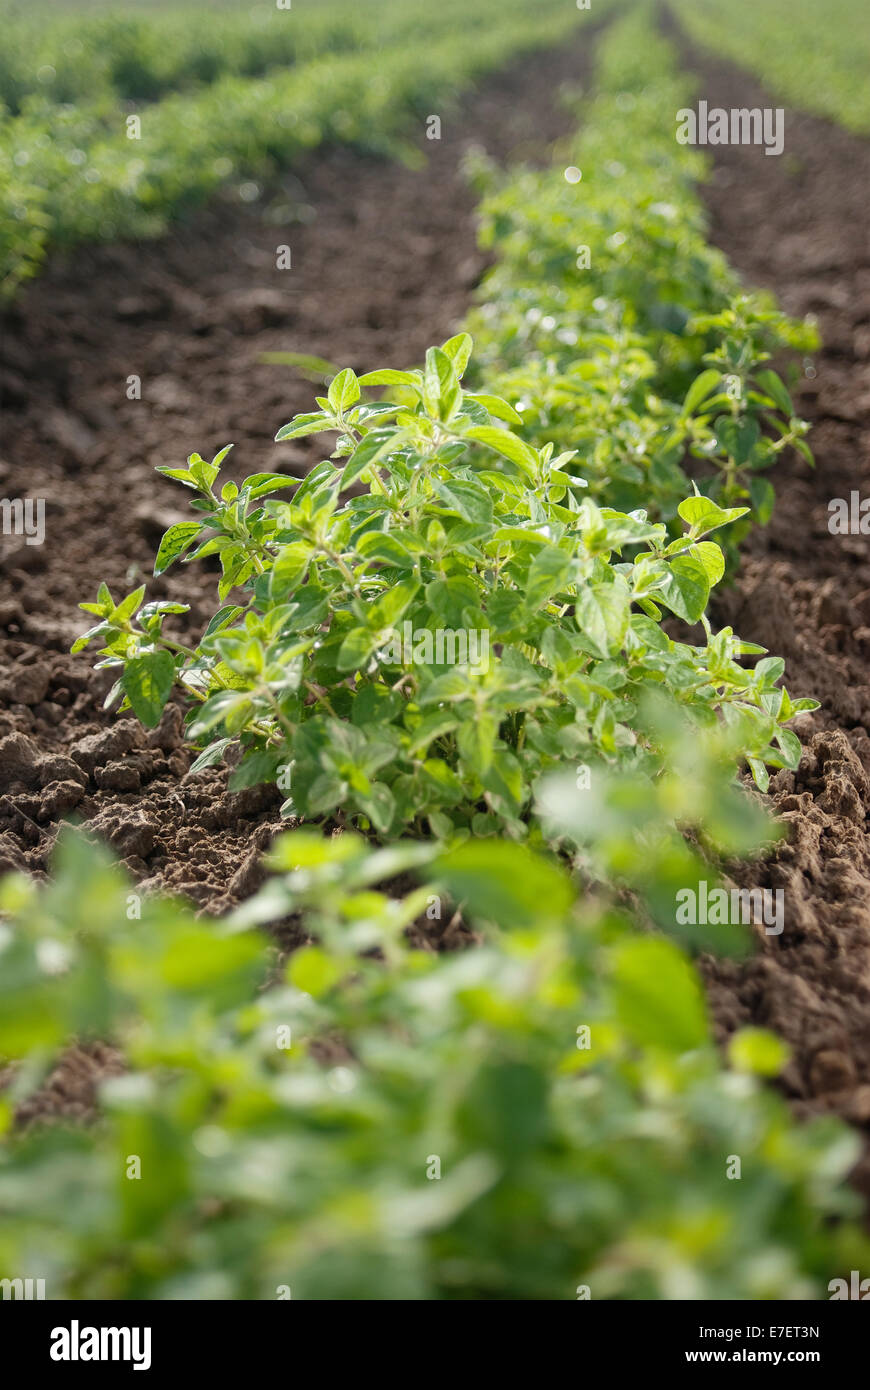 Row of young plants of organic basil. Stock Photo